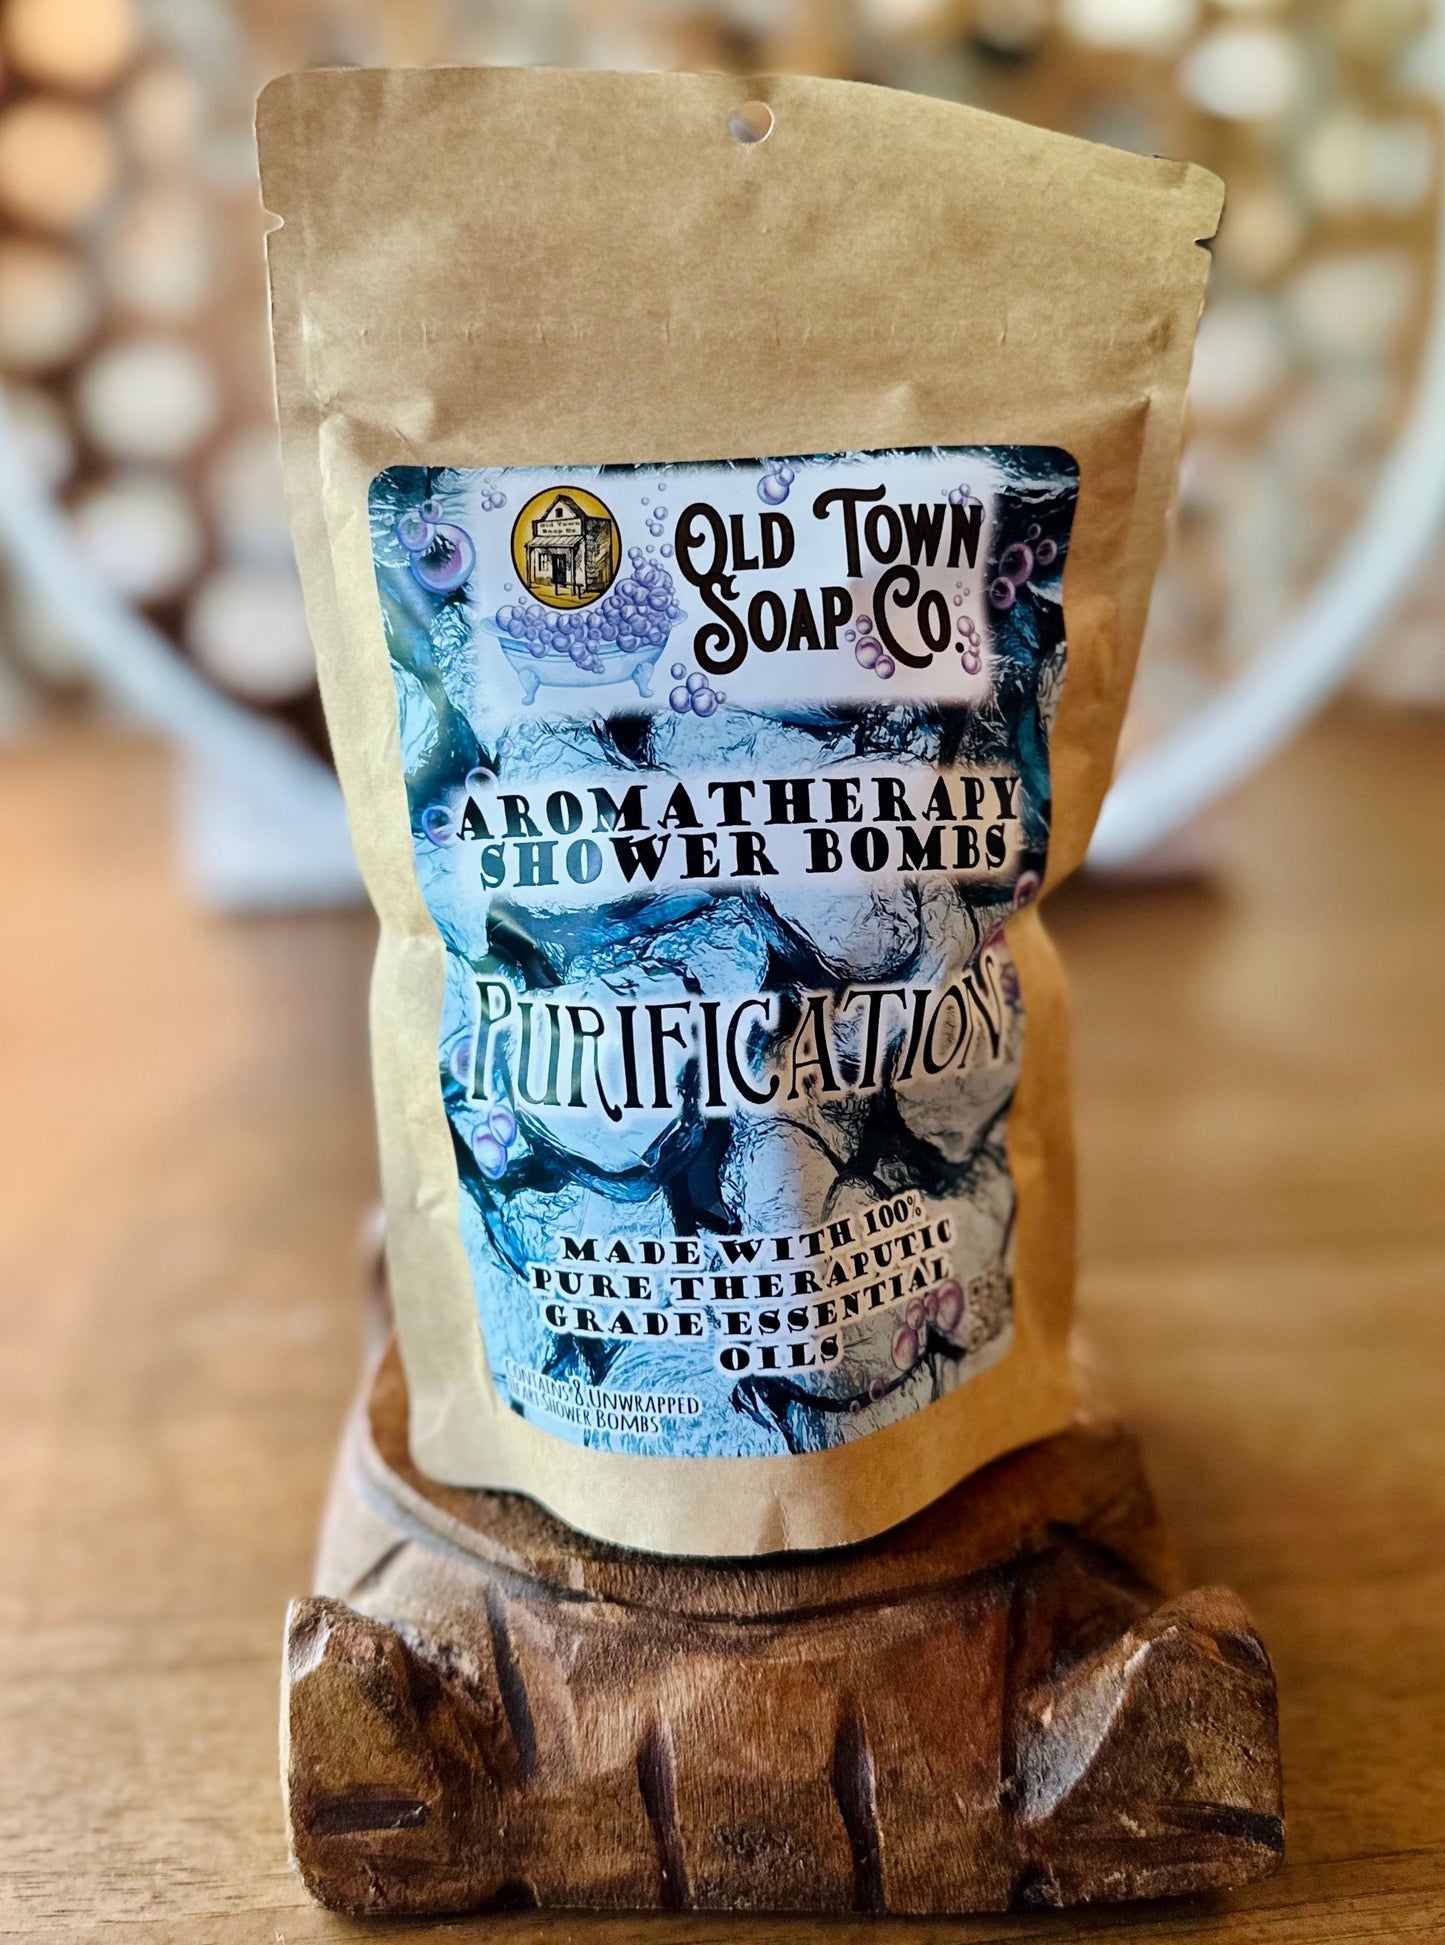 Shower Bombs - Old Town Soap Co.